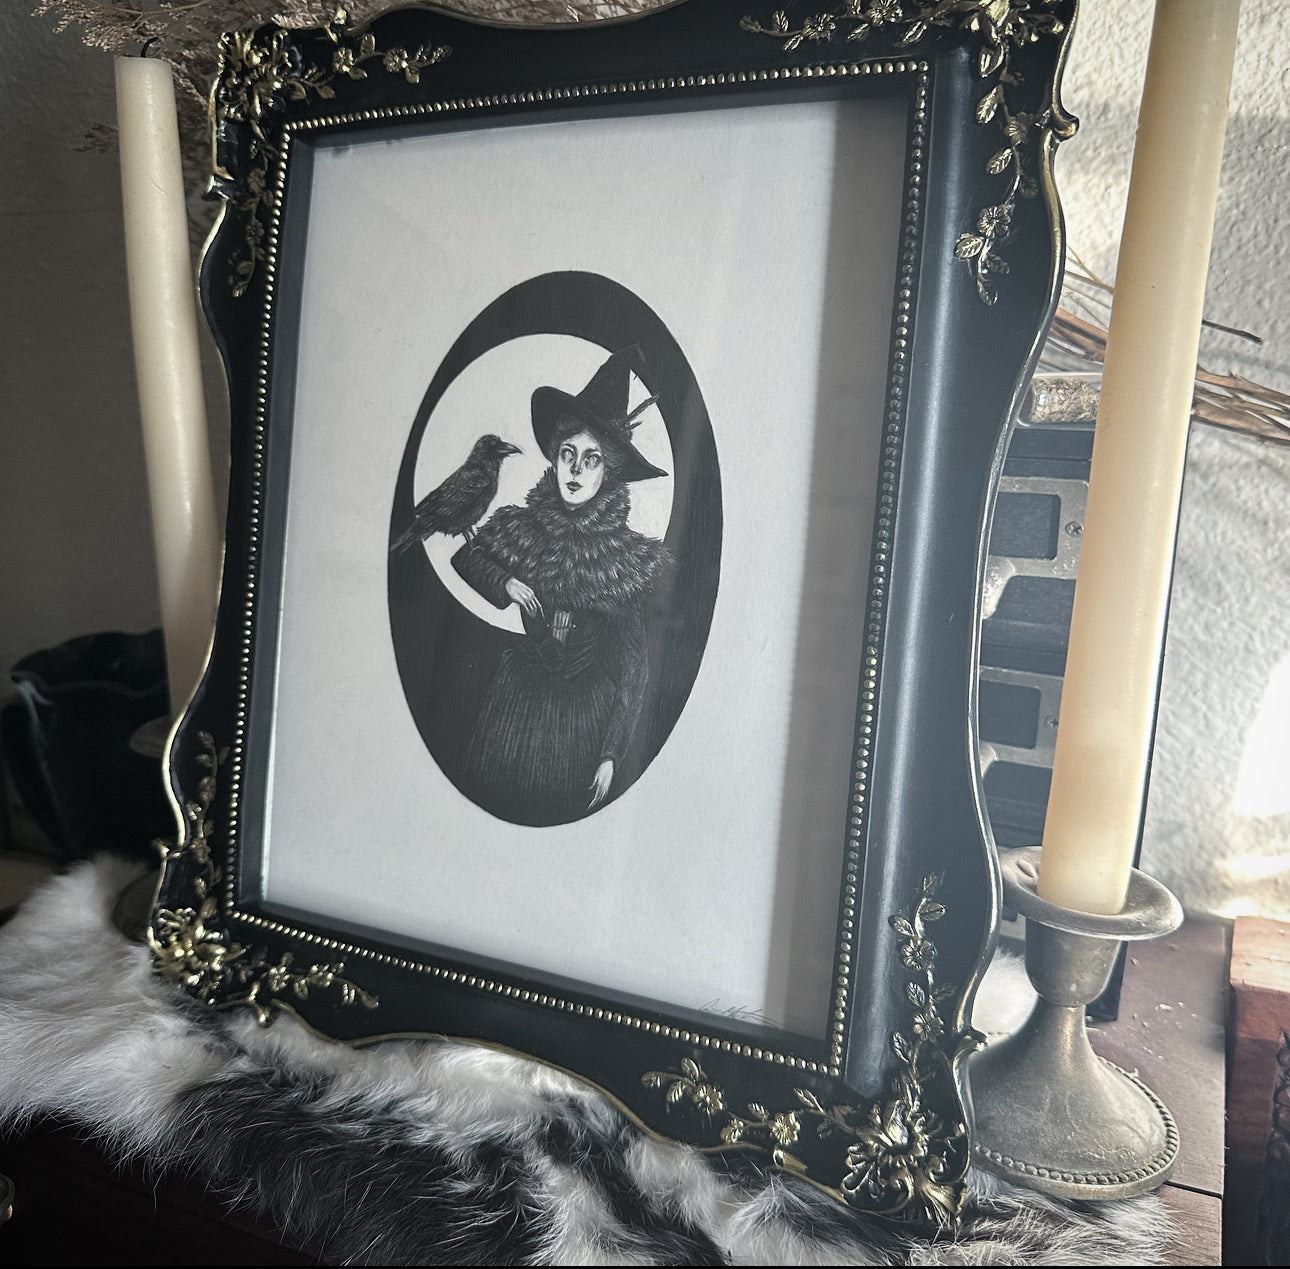 Akiko and Ambrose - Framed Original Graphite Drawing by Caitlin McCarthy